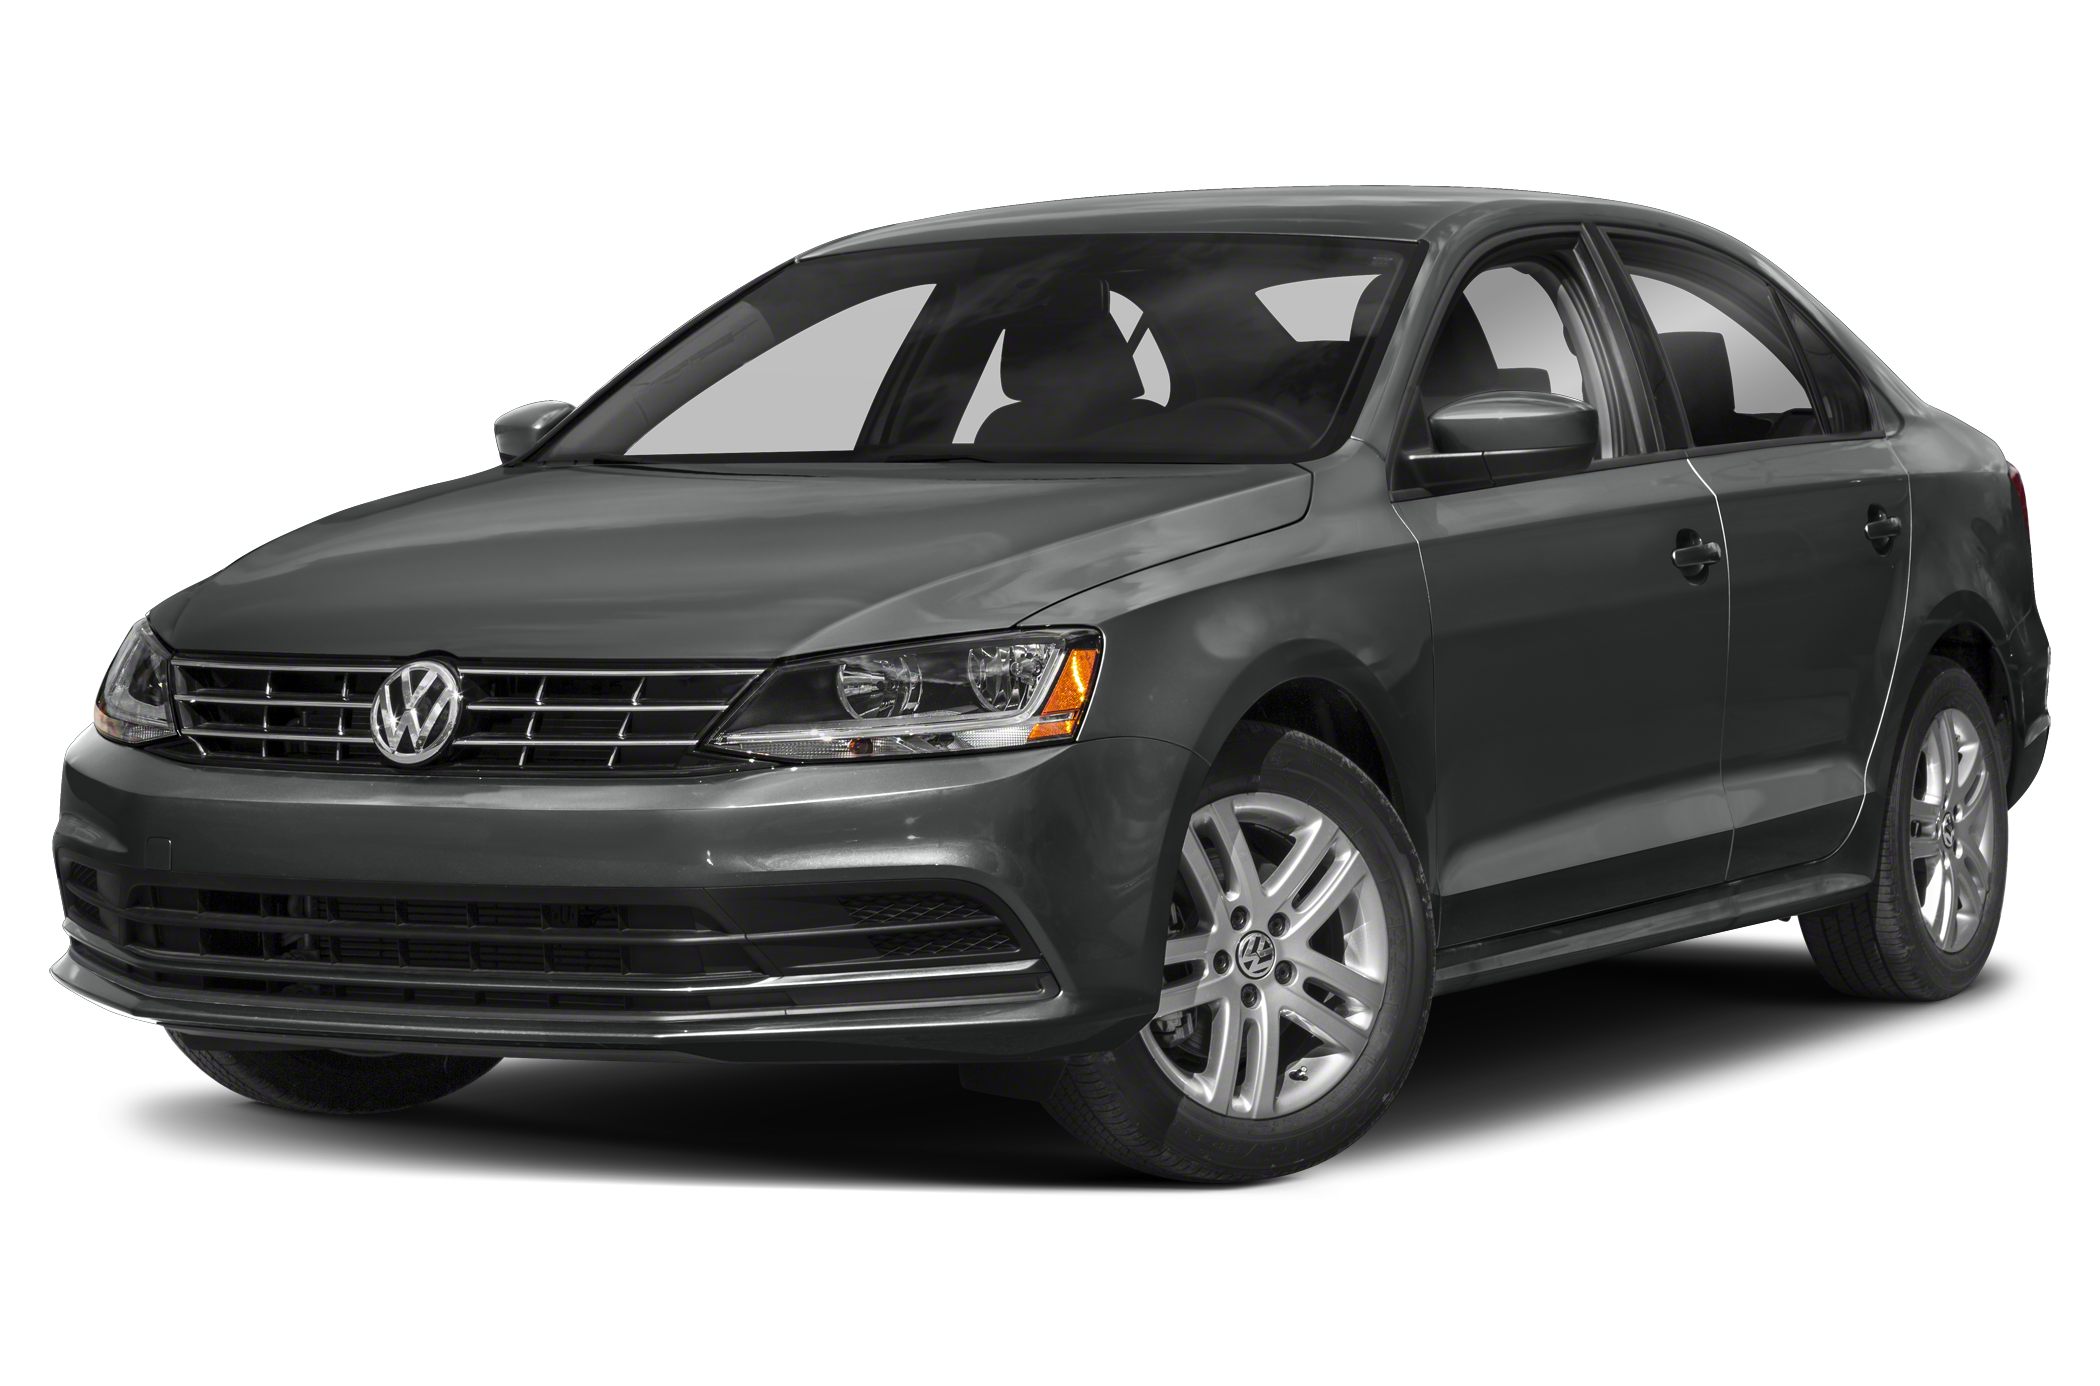 VW North American CEO 2019 Jetta's price, features key to building